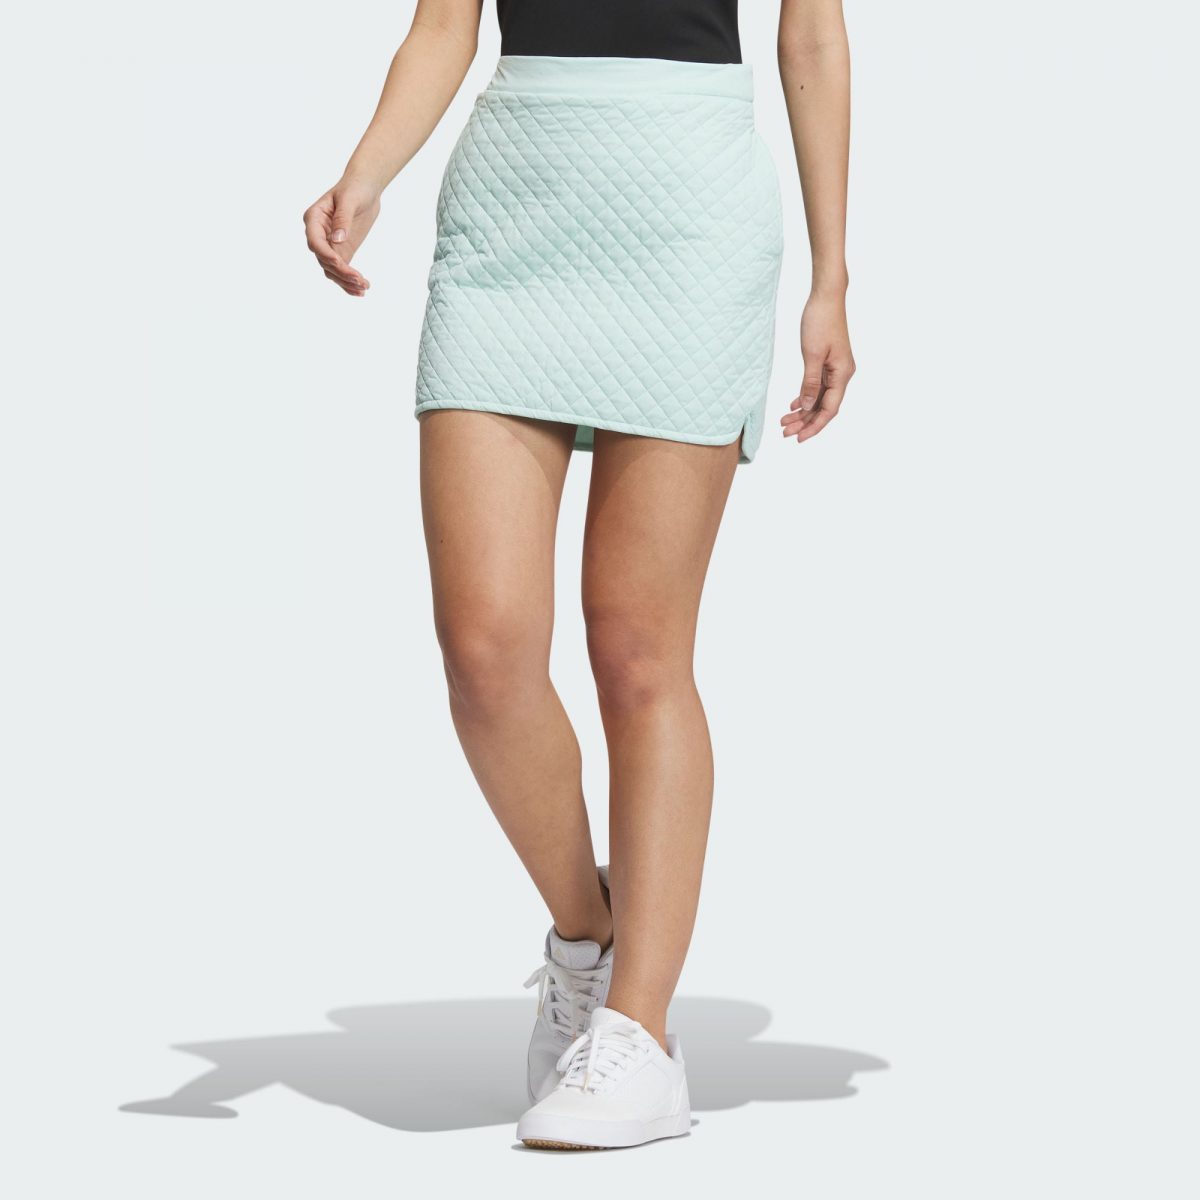 Женская юбка adidas WIND.RDY QUILTED SKIRT фото